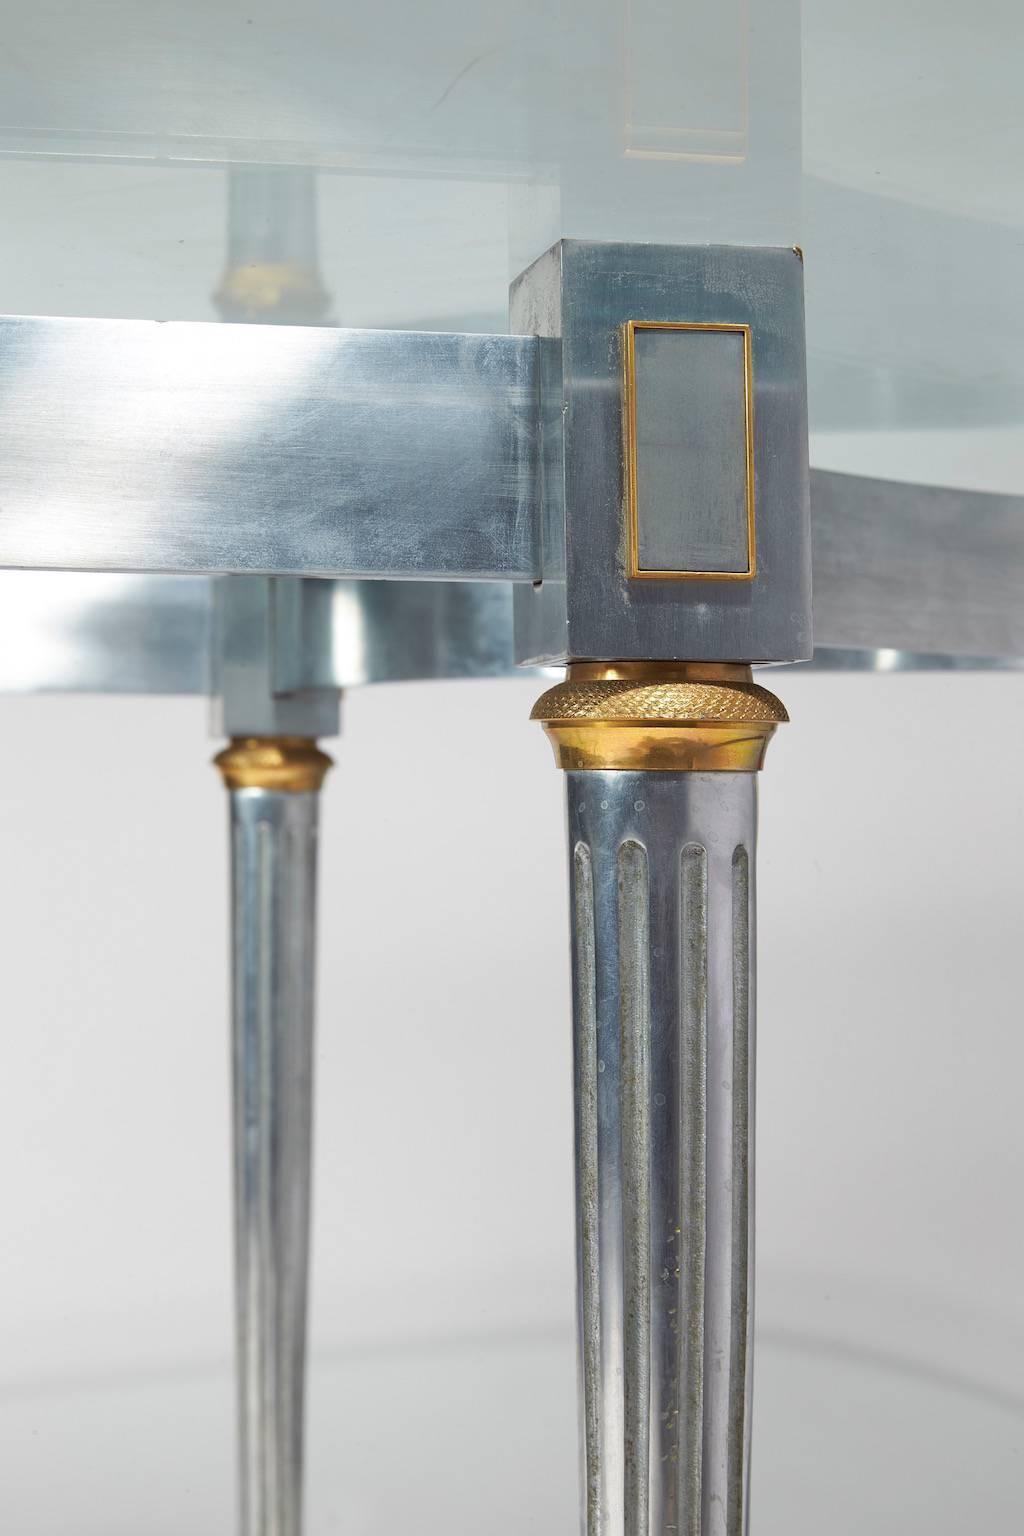 Cylindrical and fluted steel legs with gilded bronze end-legs
Glass top
neoclassic style.